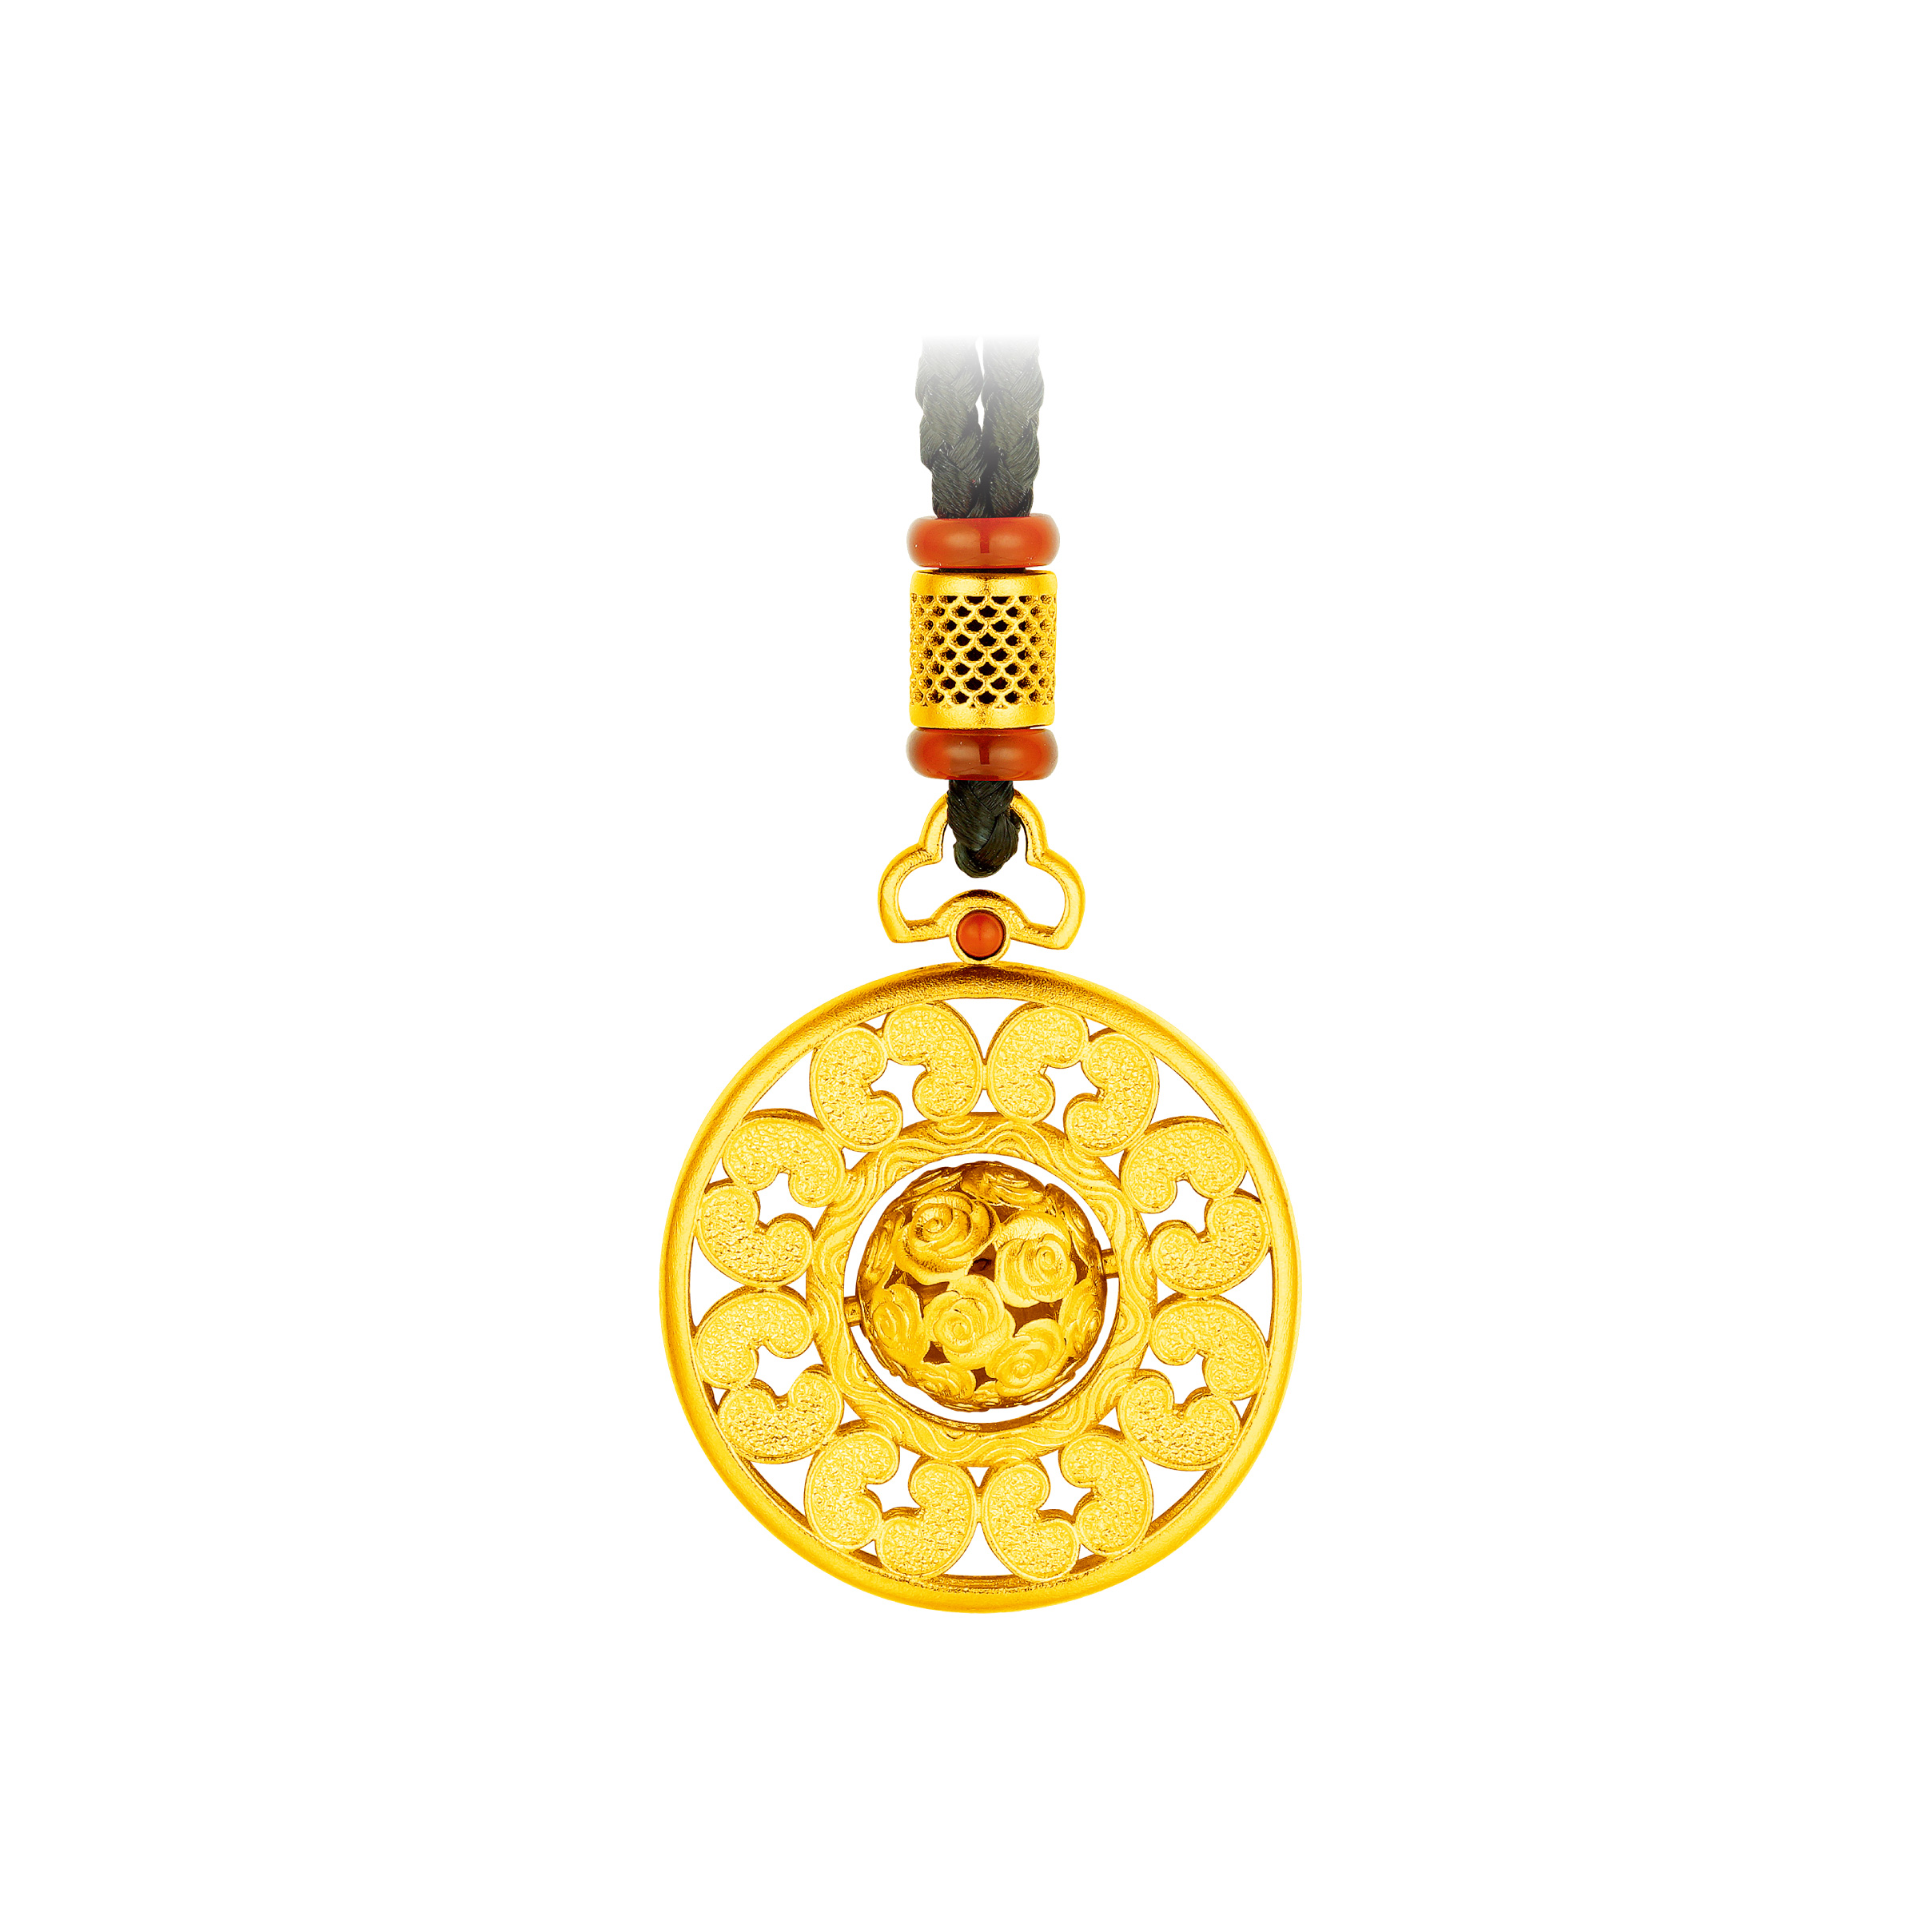 Antique Gold "Health and Happiness" Gold Pendant